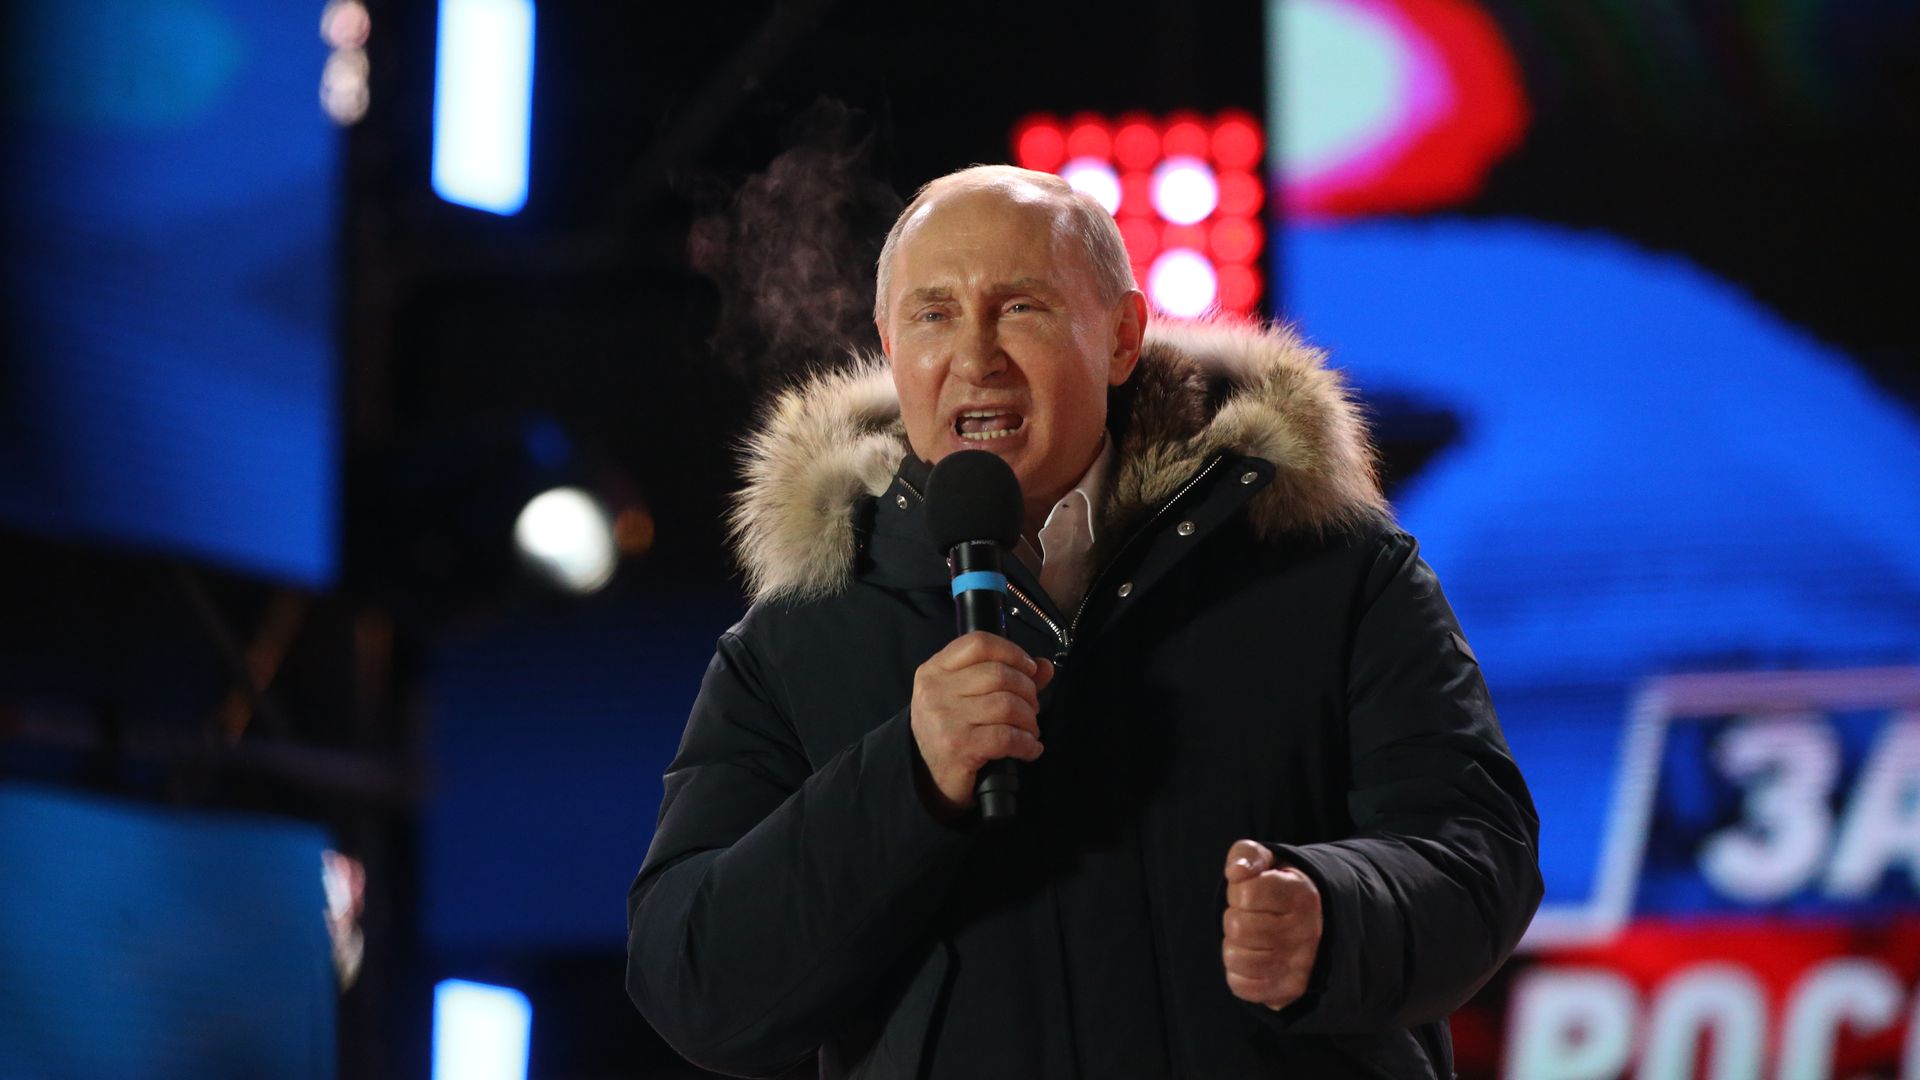 Russian President Vladimir Putin at a campaign rally in March before winning reelection